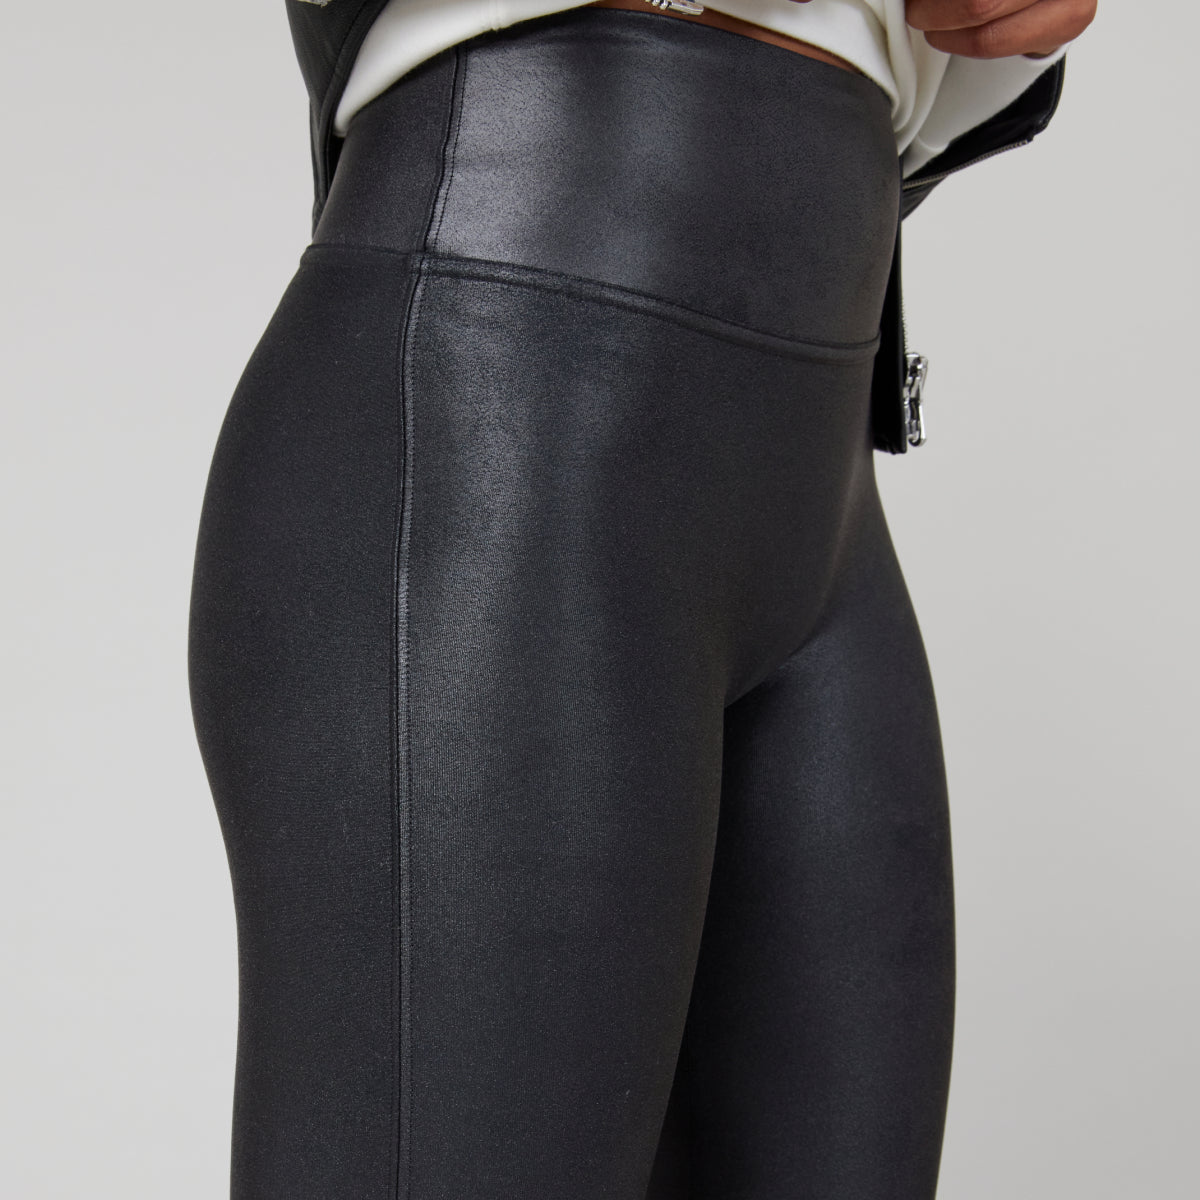 Faux Leather Spanx Leggings • Honey We're Home